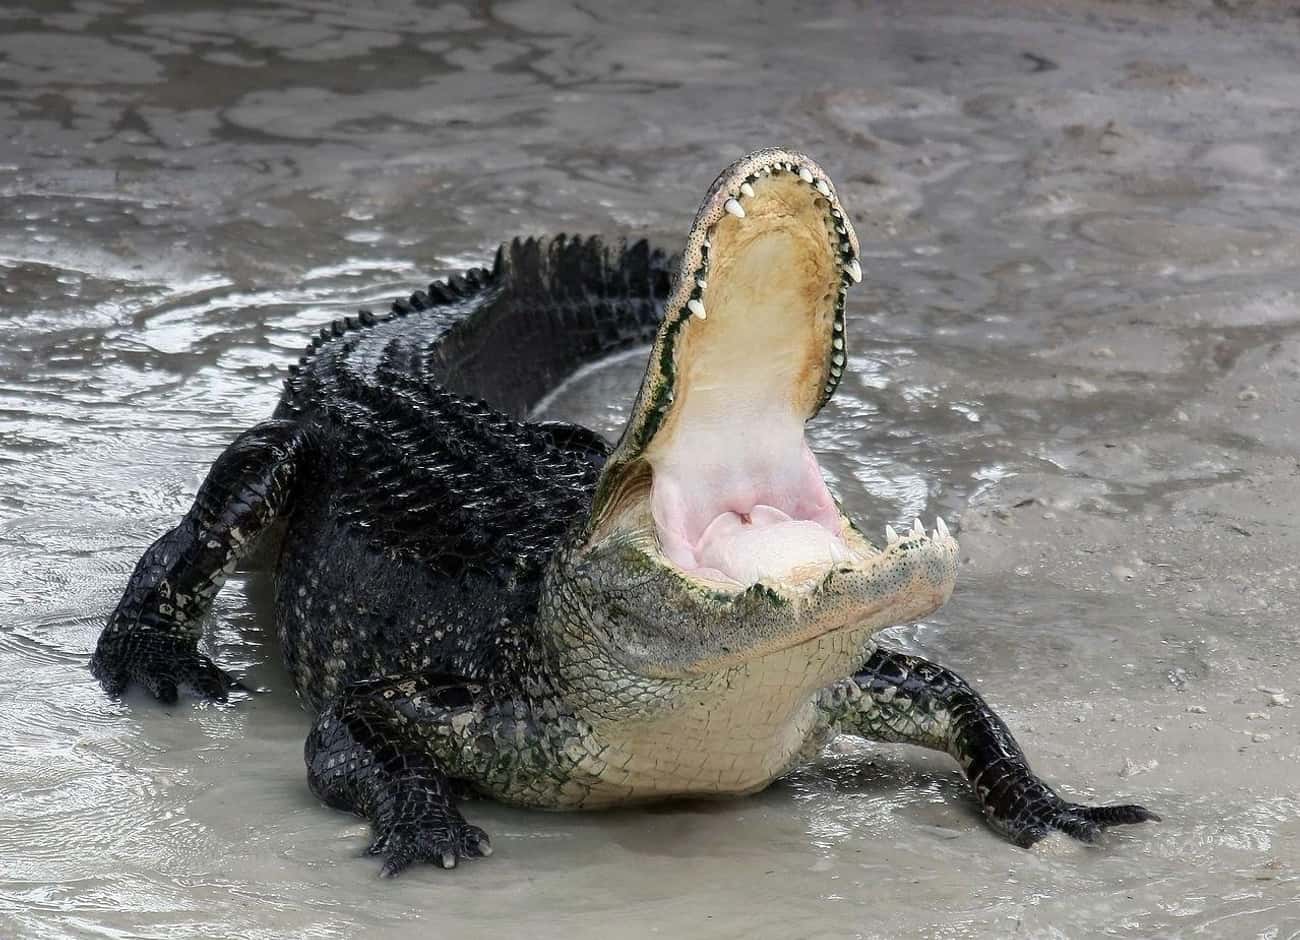 MYTH: You Should Run From An Alligator In Zigzags